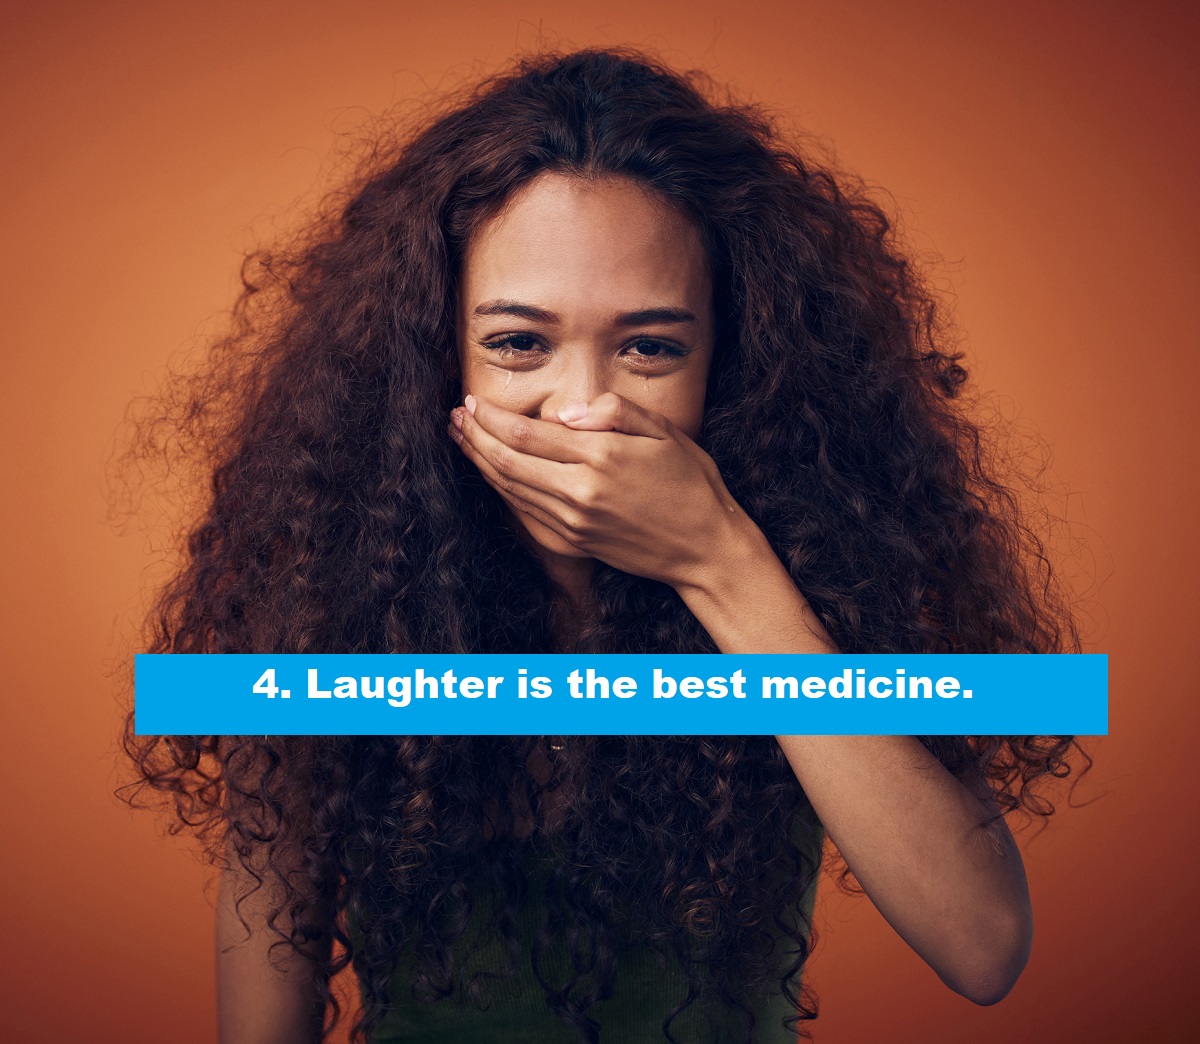 Shot of a woman with curly hair covering her mouth while laughing.